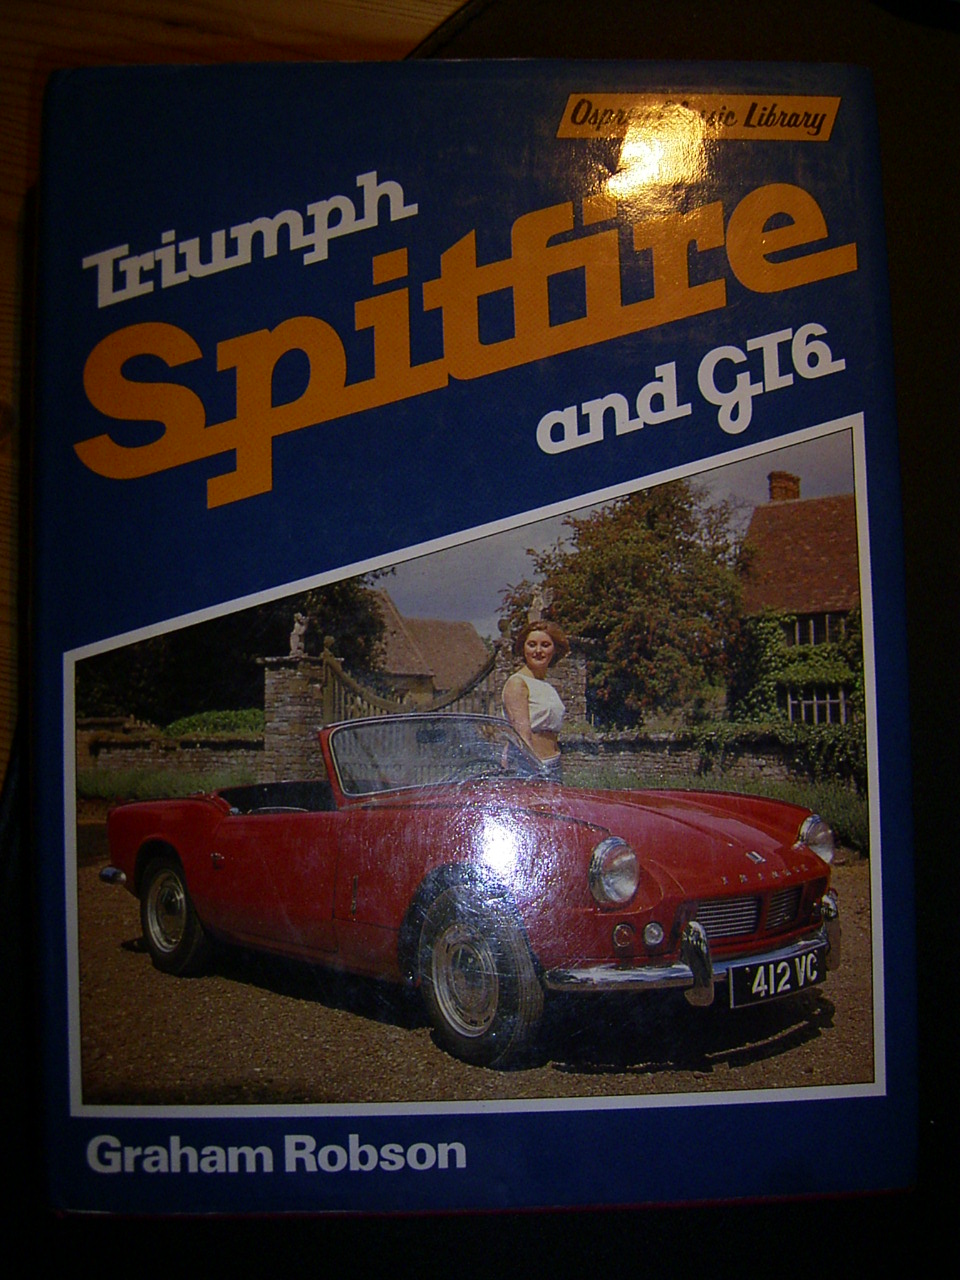 Triumph Spitfire and GT6 (Graham Robson)